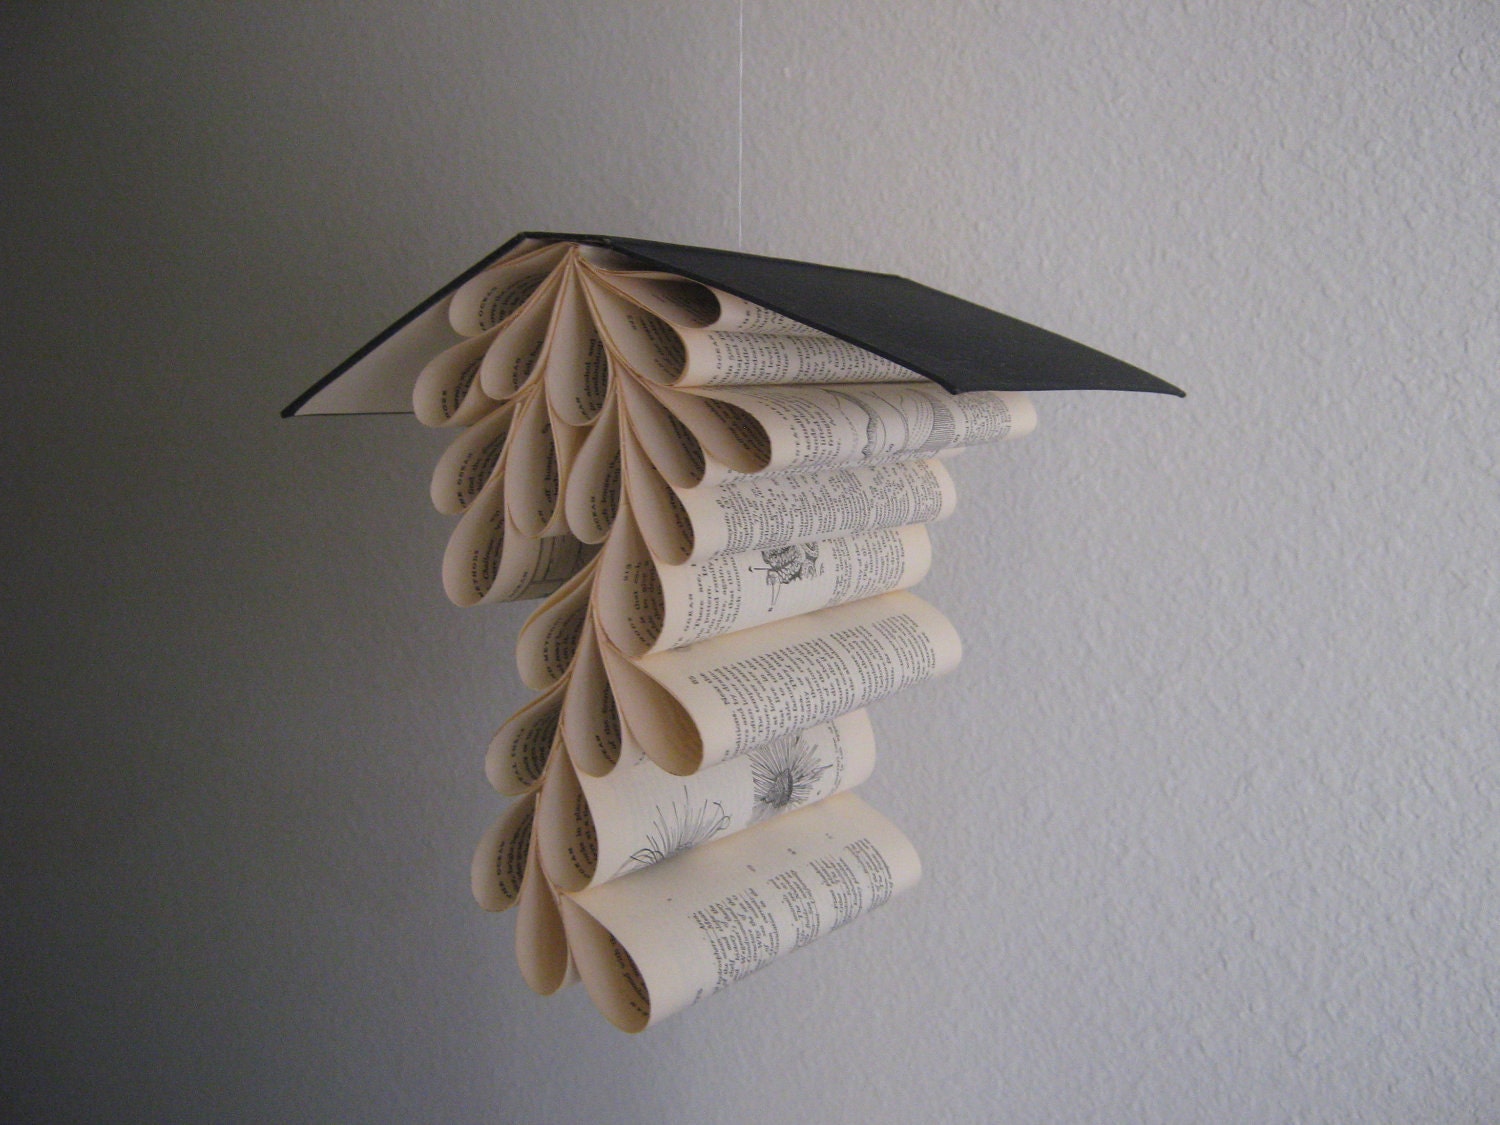 Book Mobile Upcycled from a Vintage Copy of Ocean by Ommanney from Oxford Press